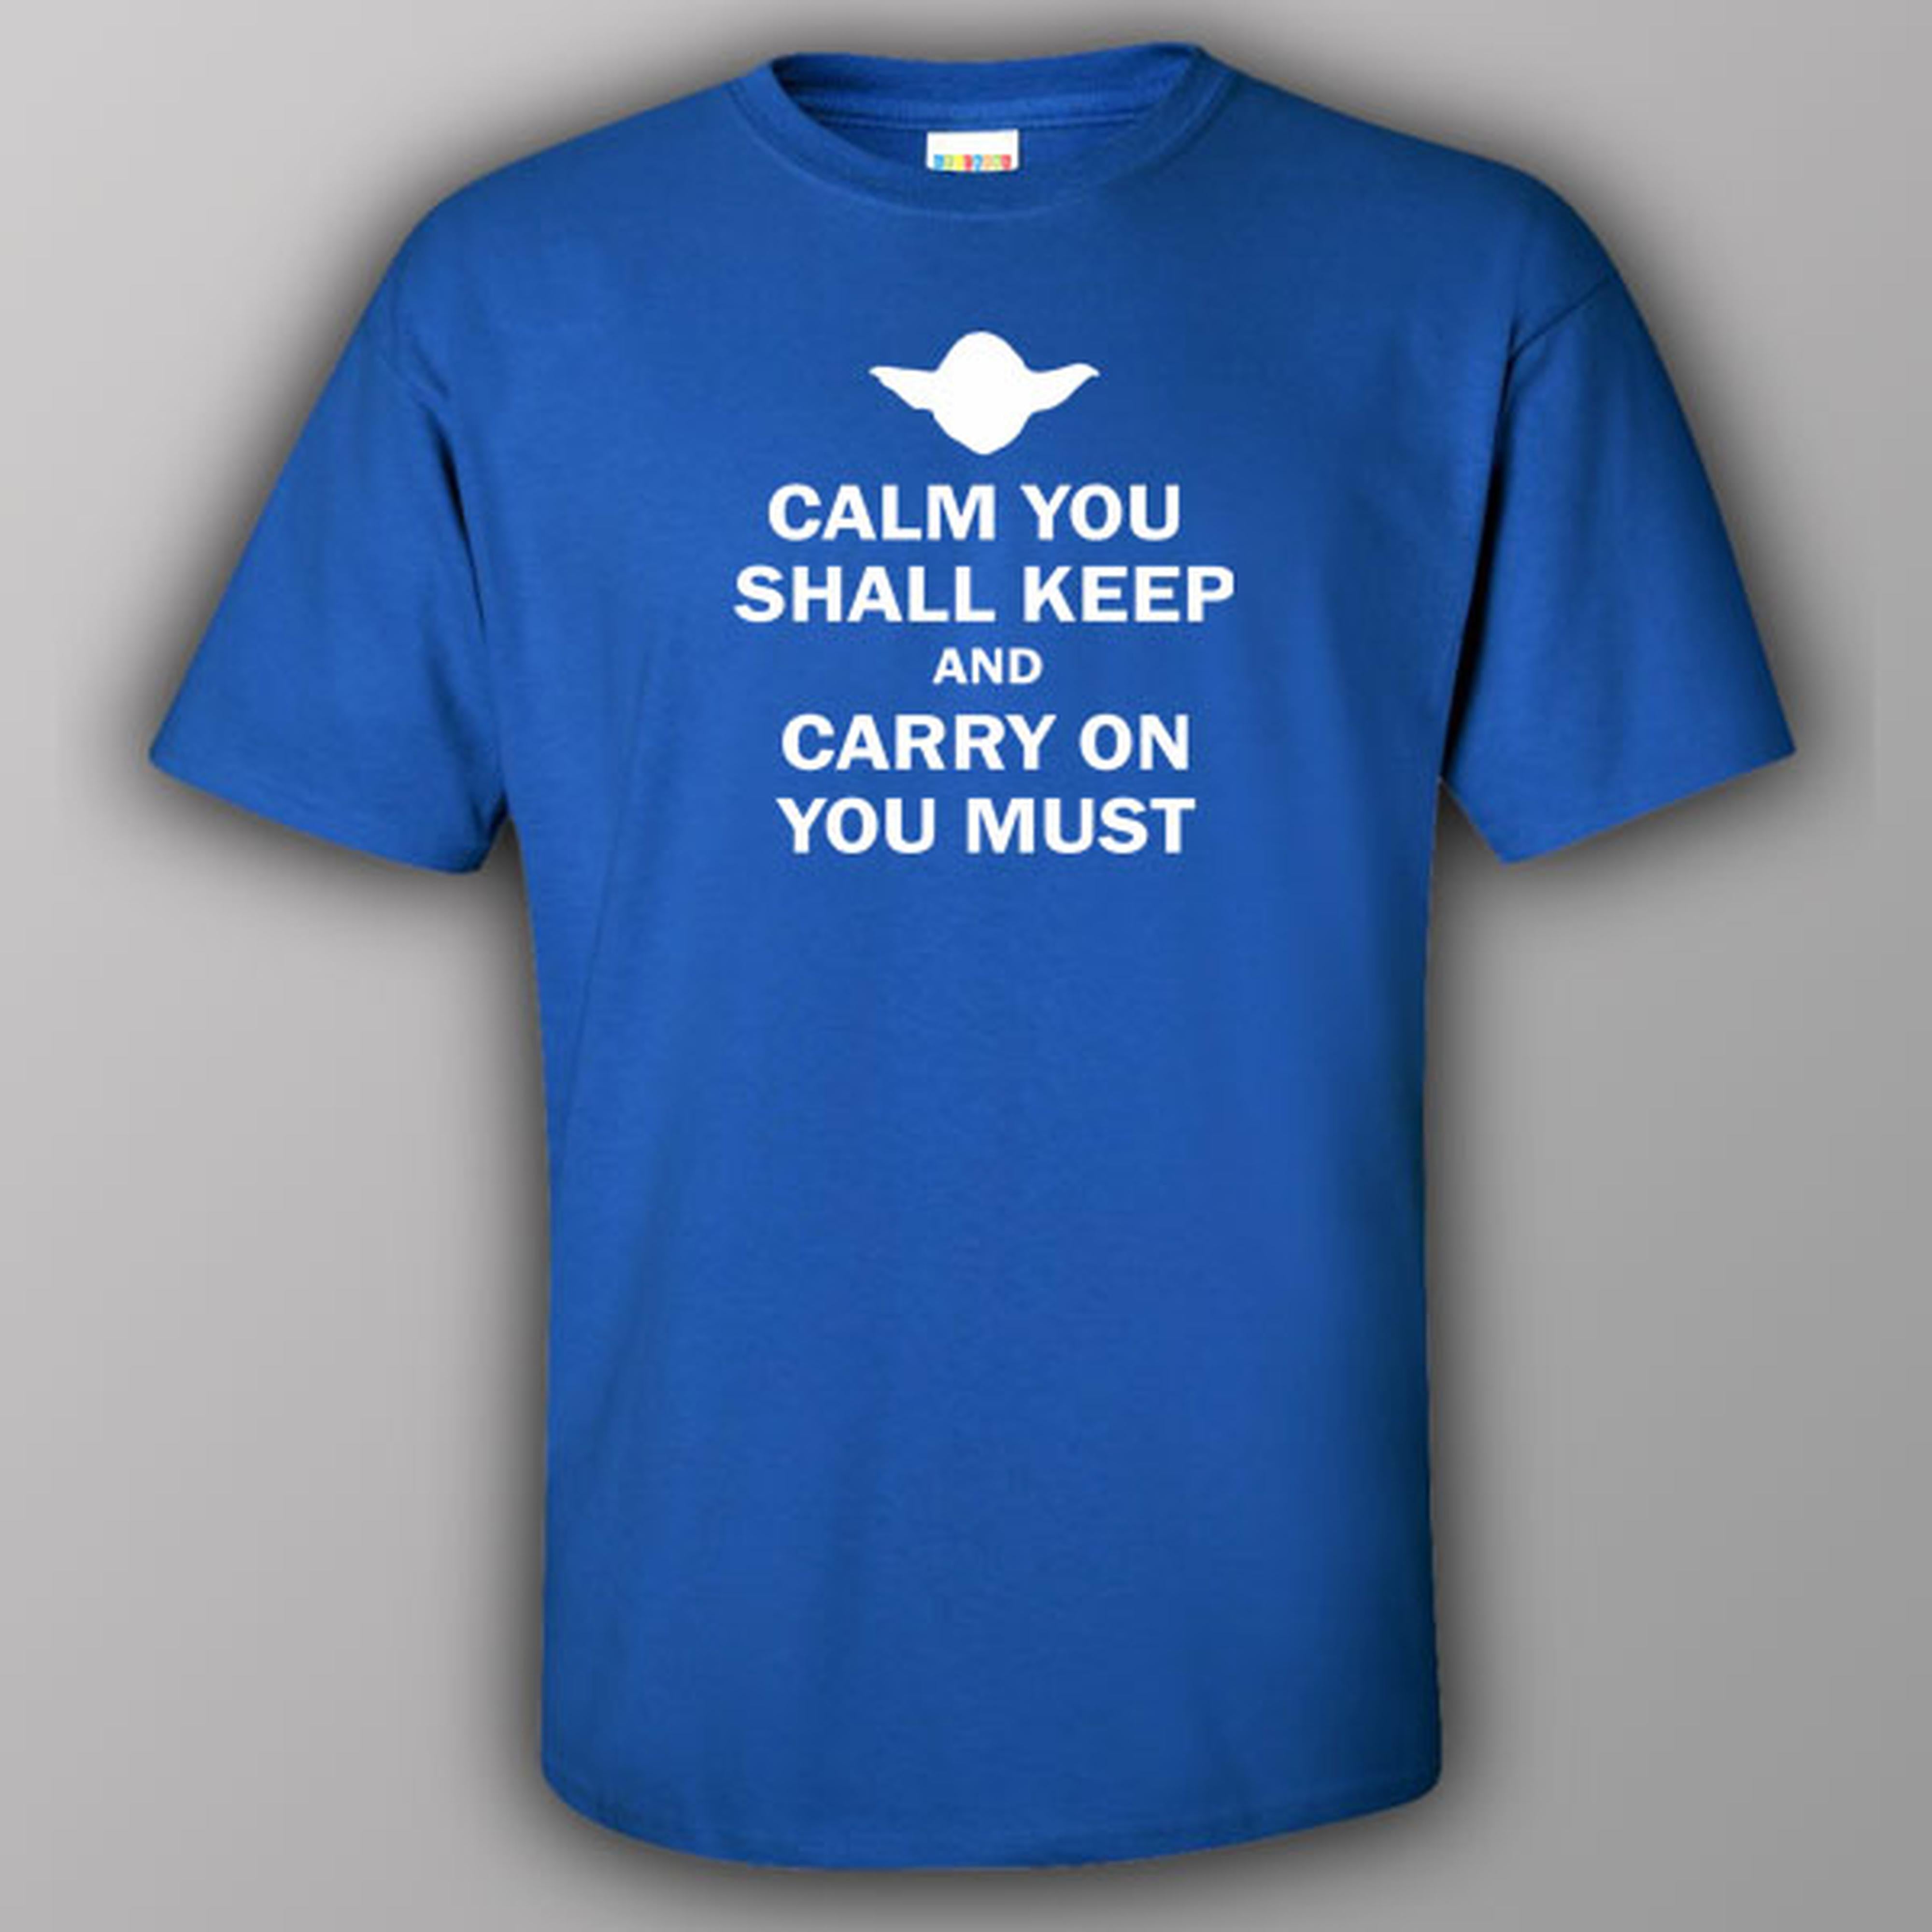 calm-you-shall-keep-and-carry-on-you-must-t-shirt